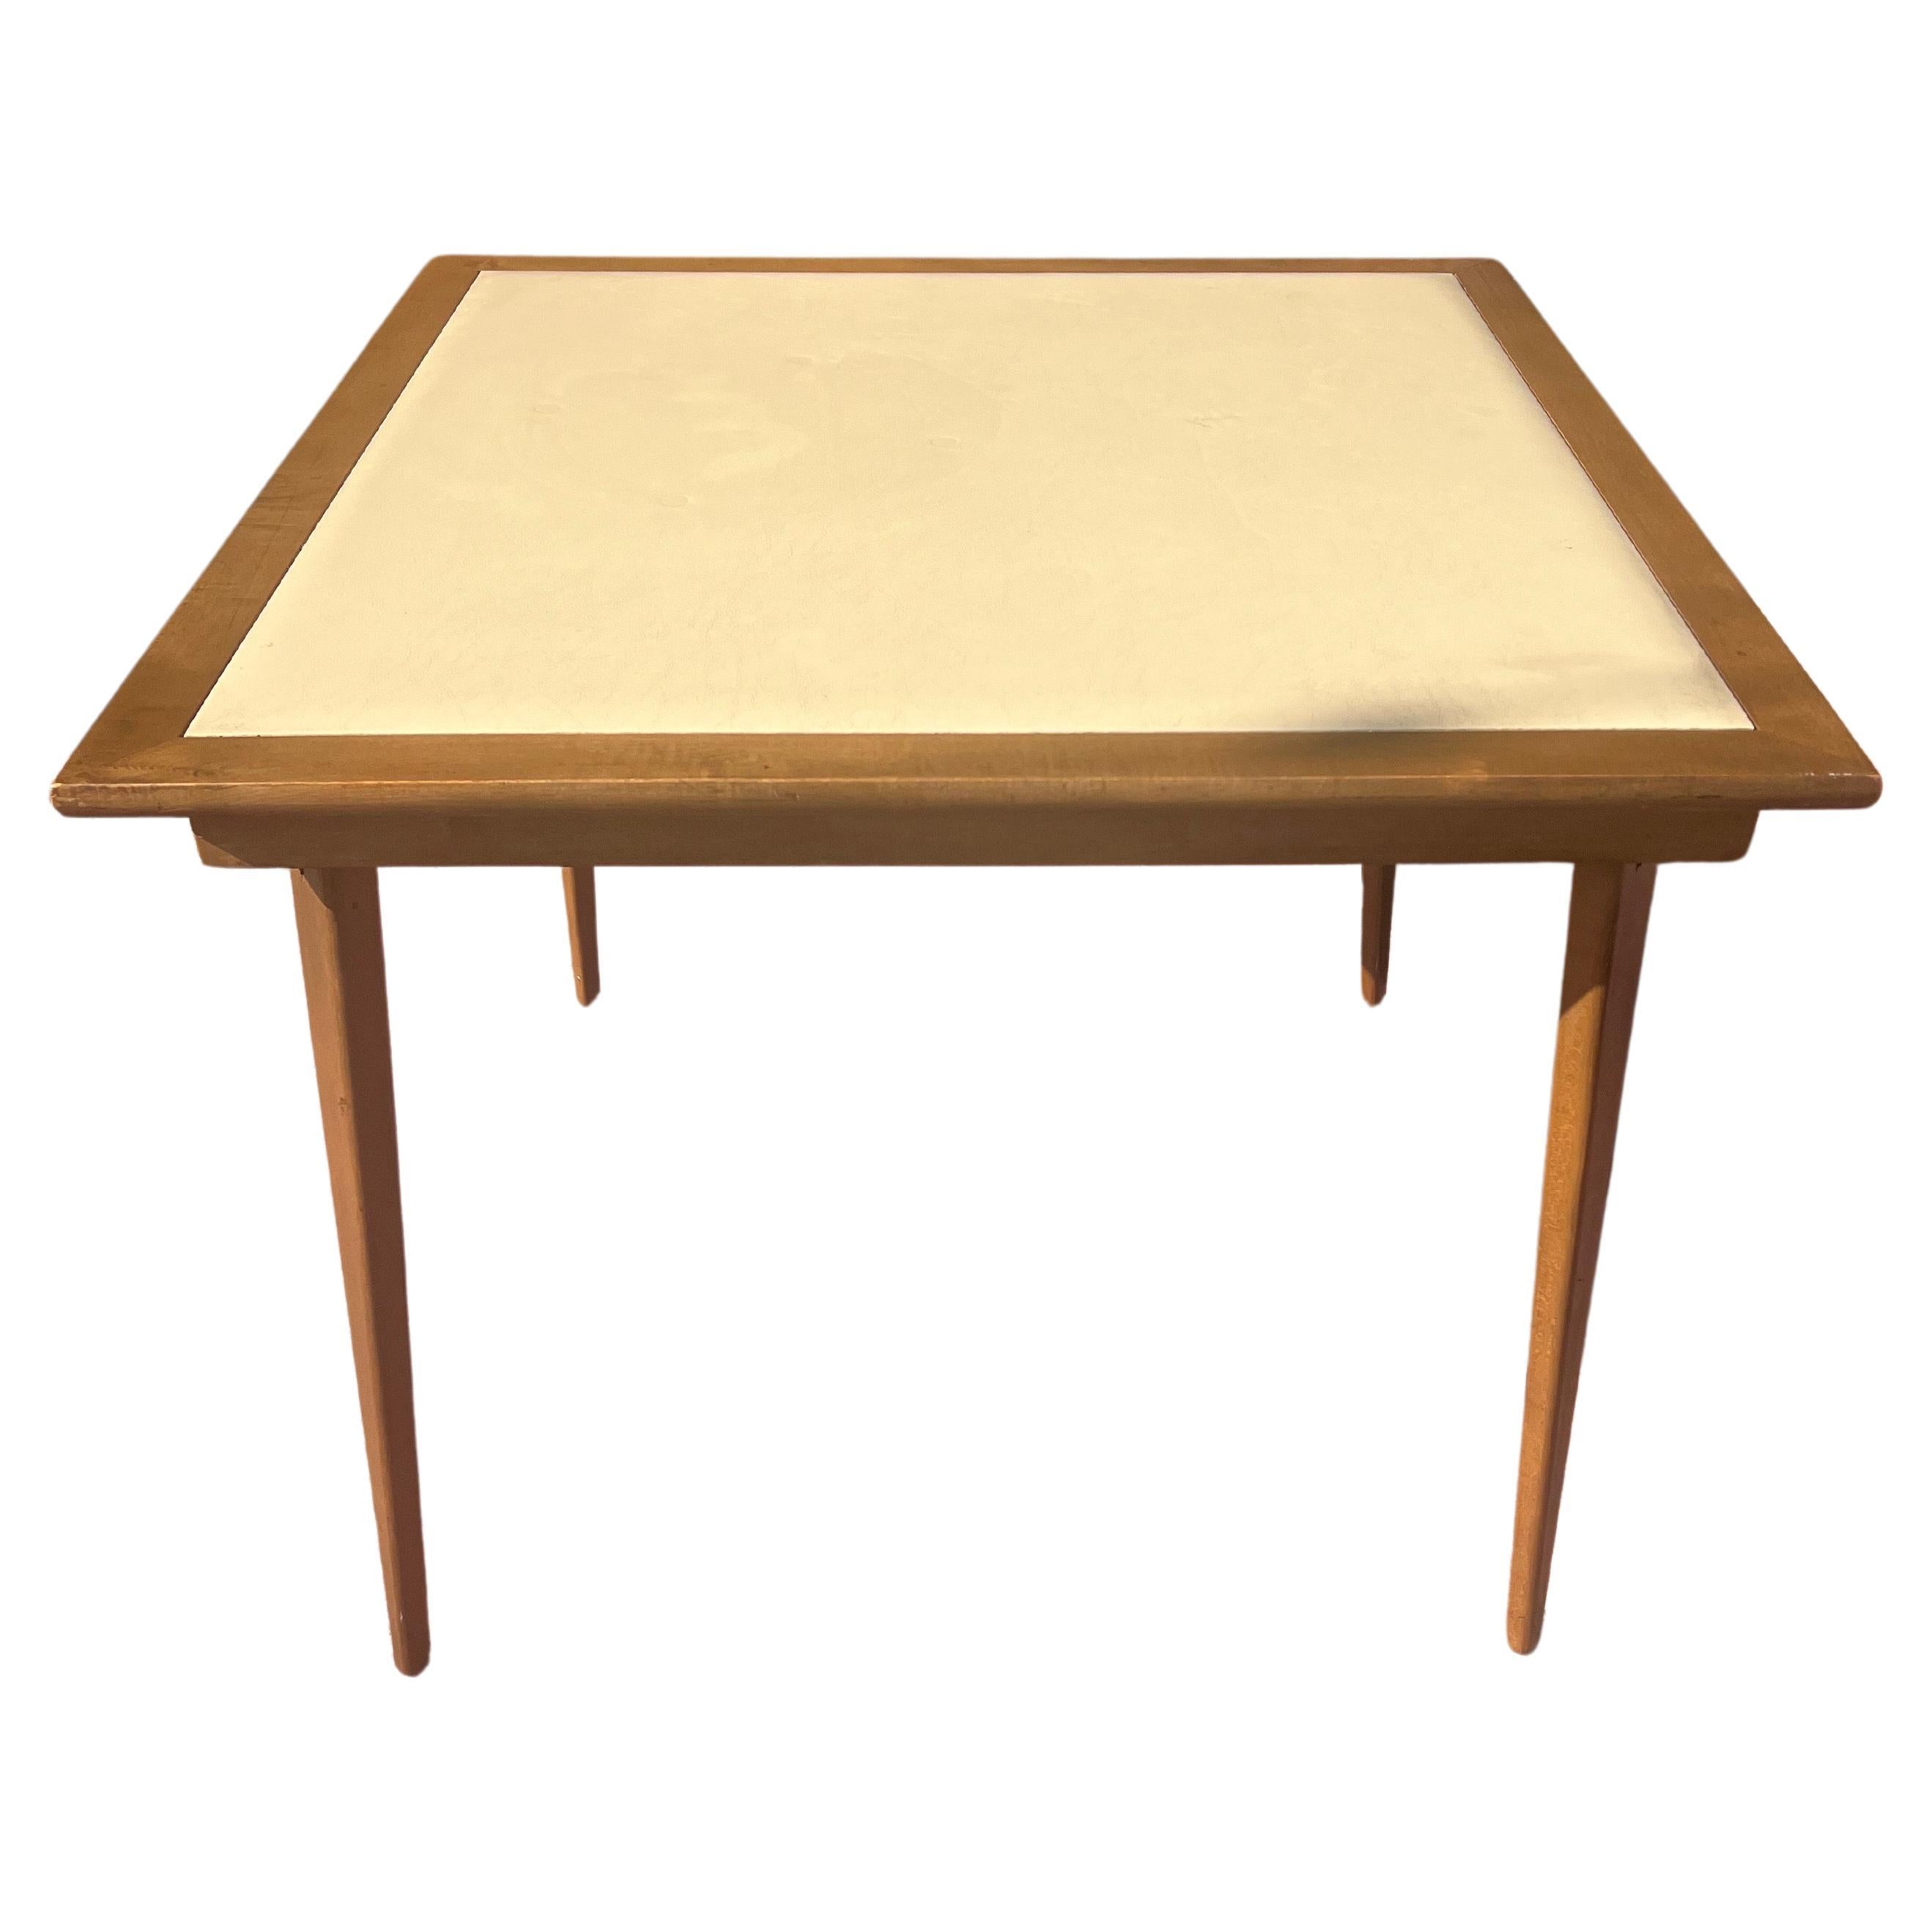 versatile and practical American mid-century modern Folding table with cream color naugahyde top and walnut frame, very nice condition and light use standard high for dining or for playing, light and sturdy circa 1950's.nice tapered legs easy to